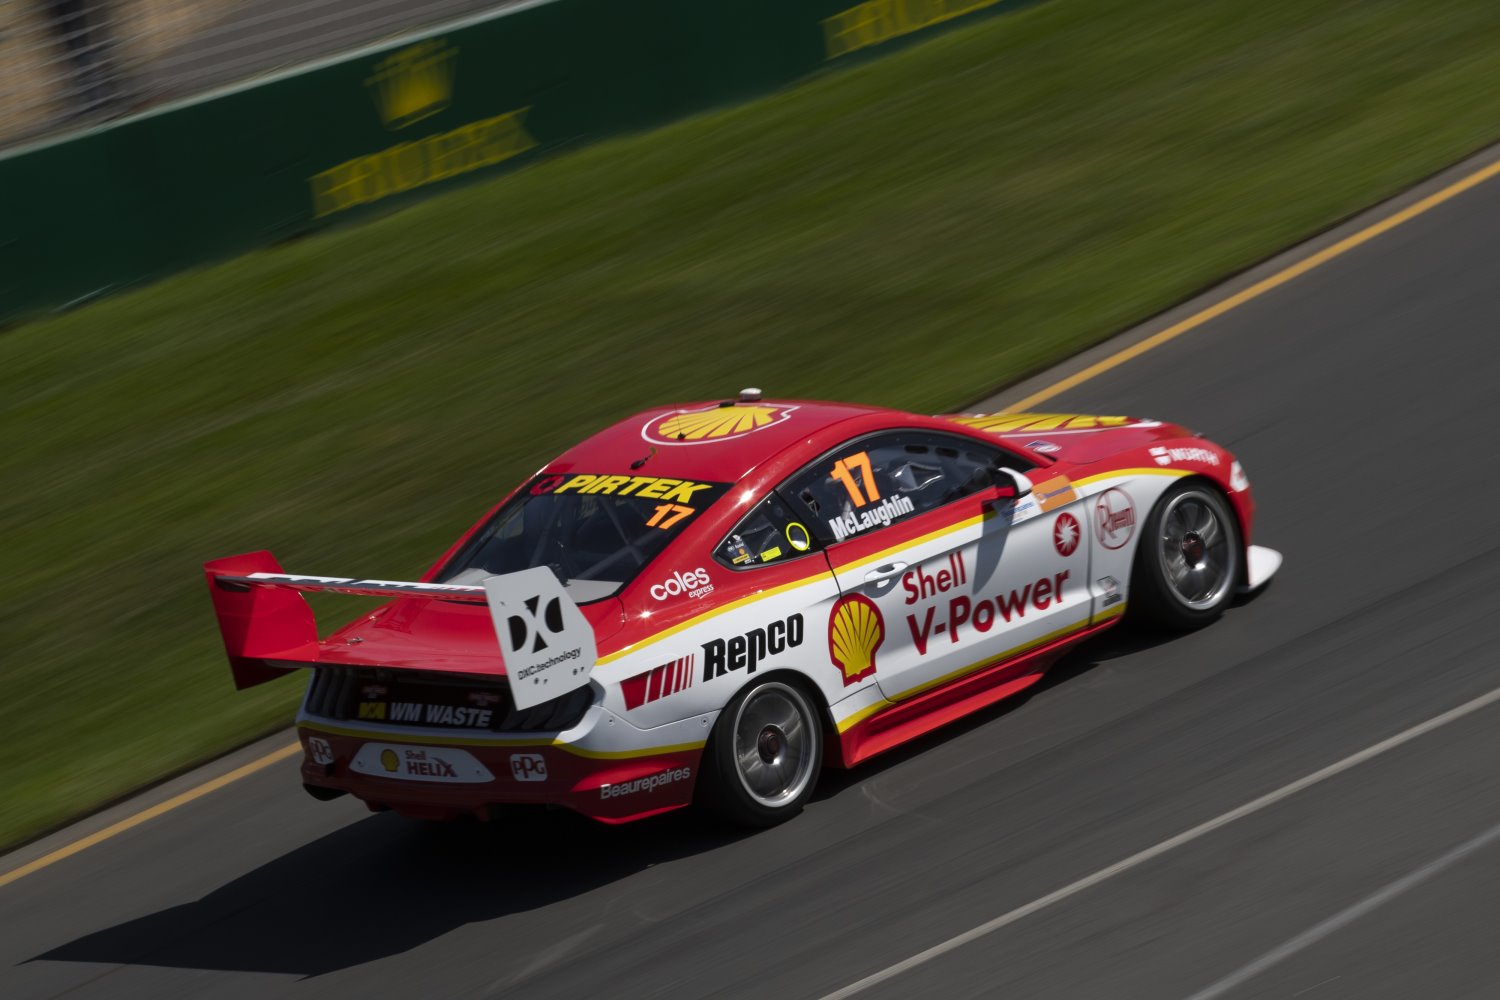 The Penske Mustangs will unleash more HP in response to the changes